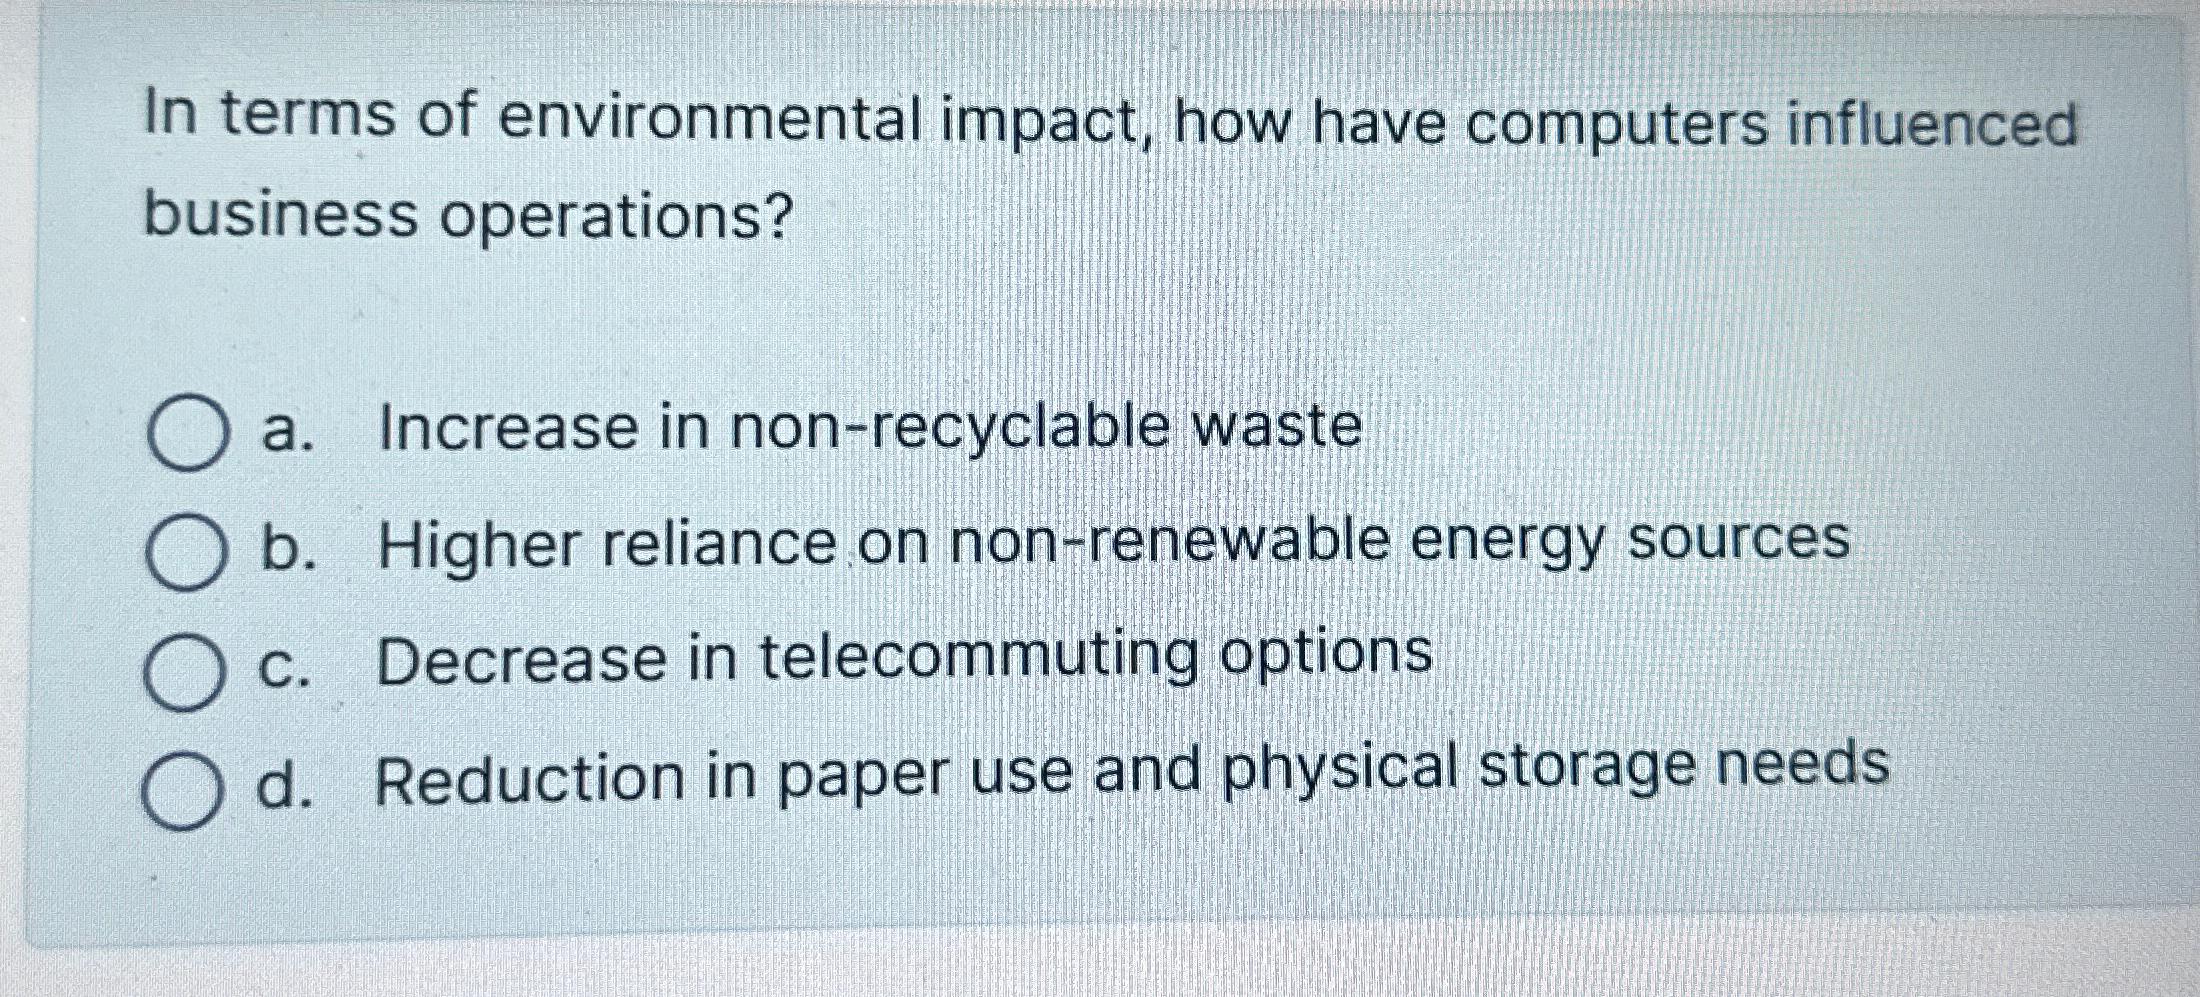 Green companies: how to reduce the impact of corporate paper consumption?